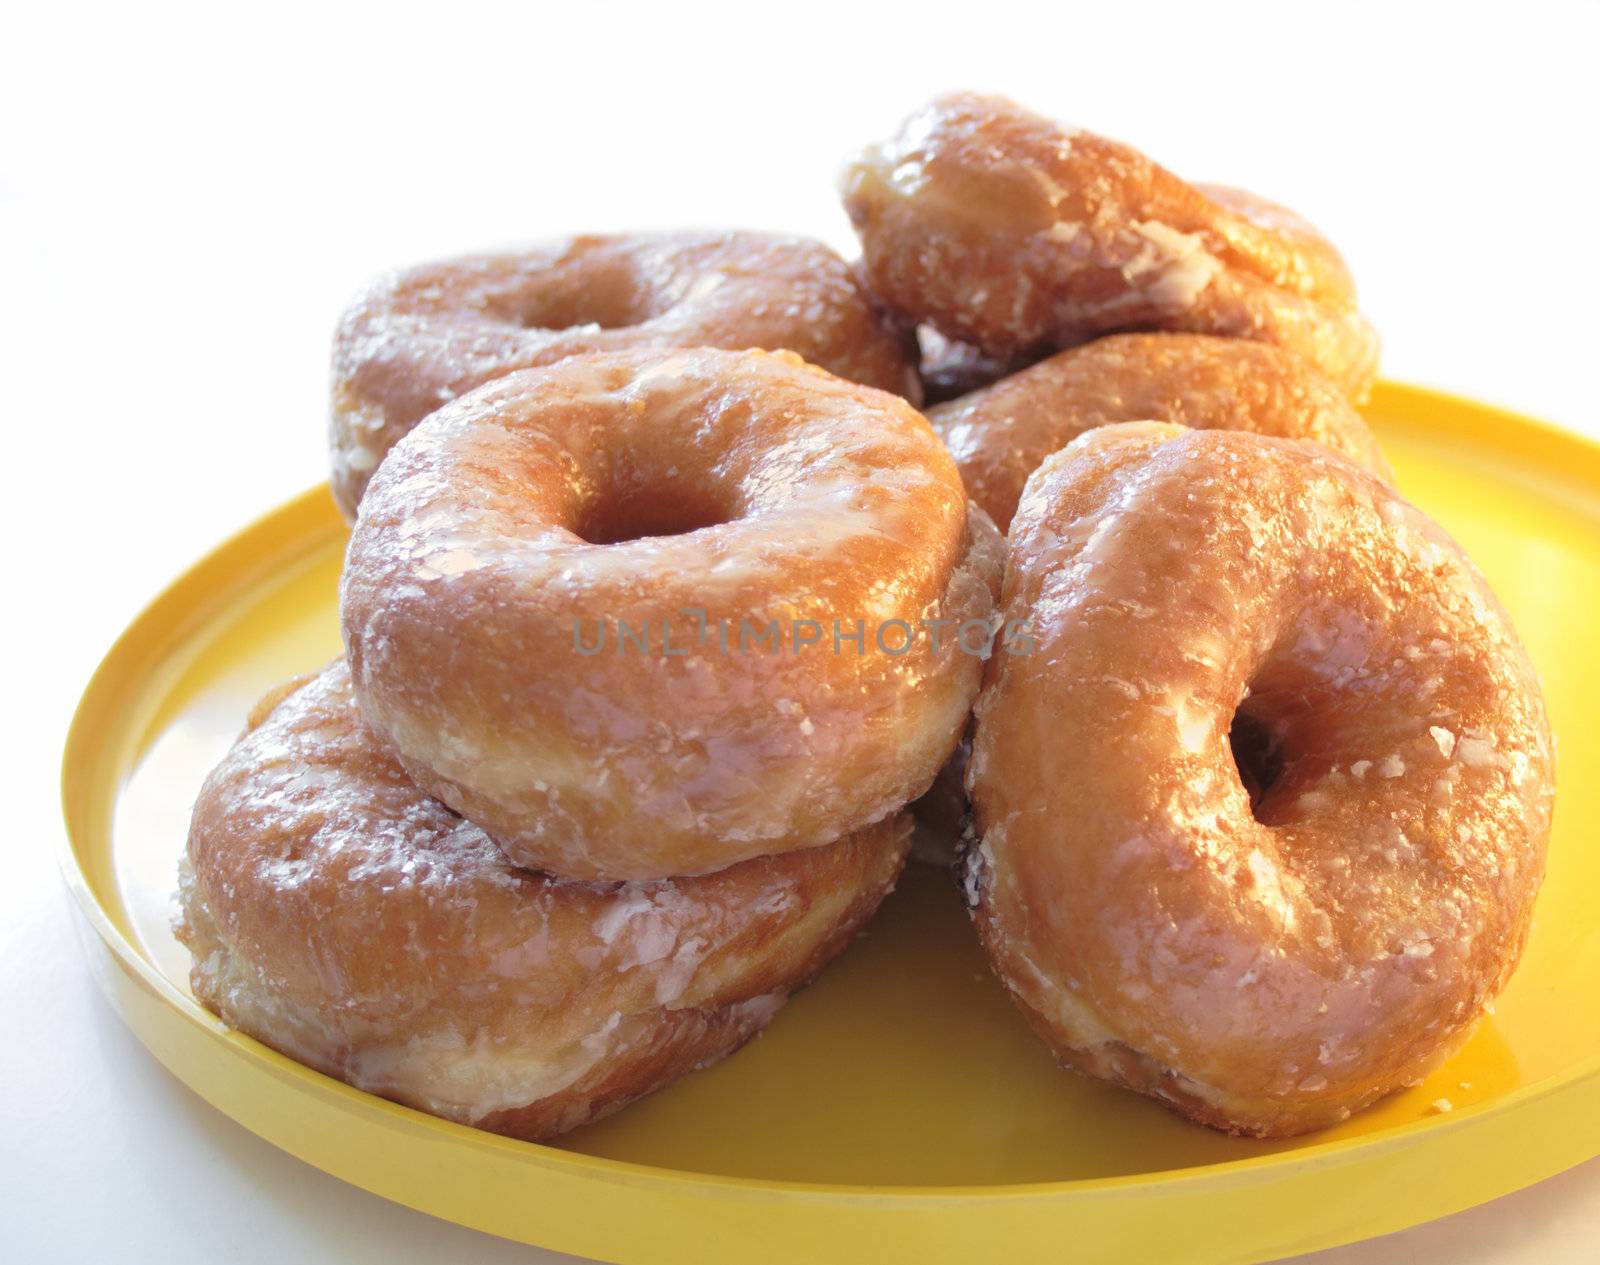 glazed yeast doughnuts on a yellow plate